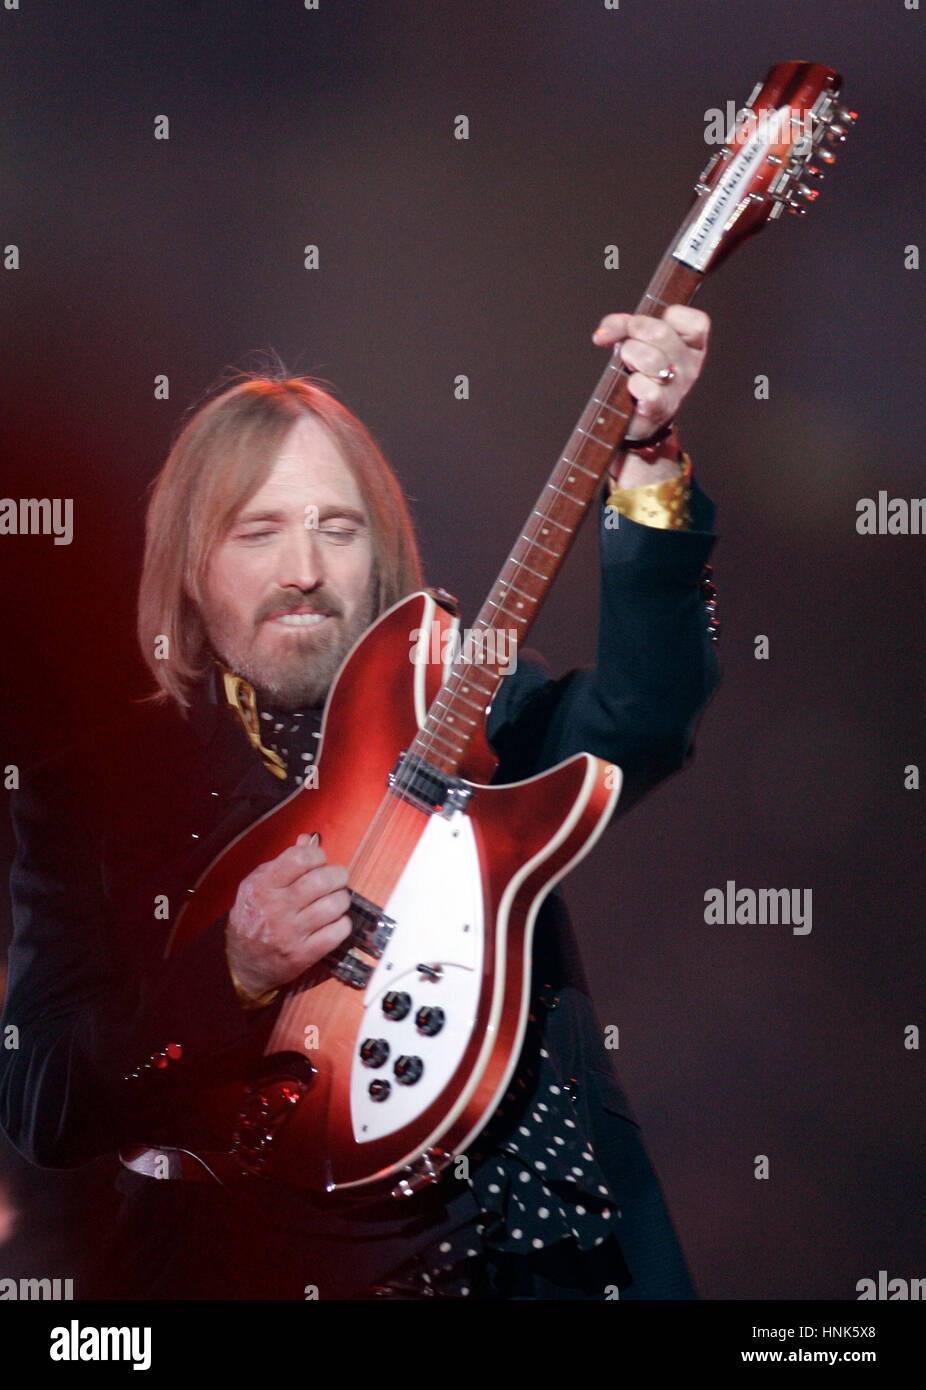 Tom Petty and the Heartbreakers perform during the half-time show at Super Bowl XXLII in Glendale, AZ on Sunday, Feb. 3, 2008. Photo by Francis Specker Stock Photo